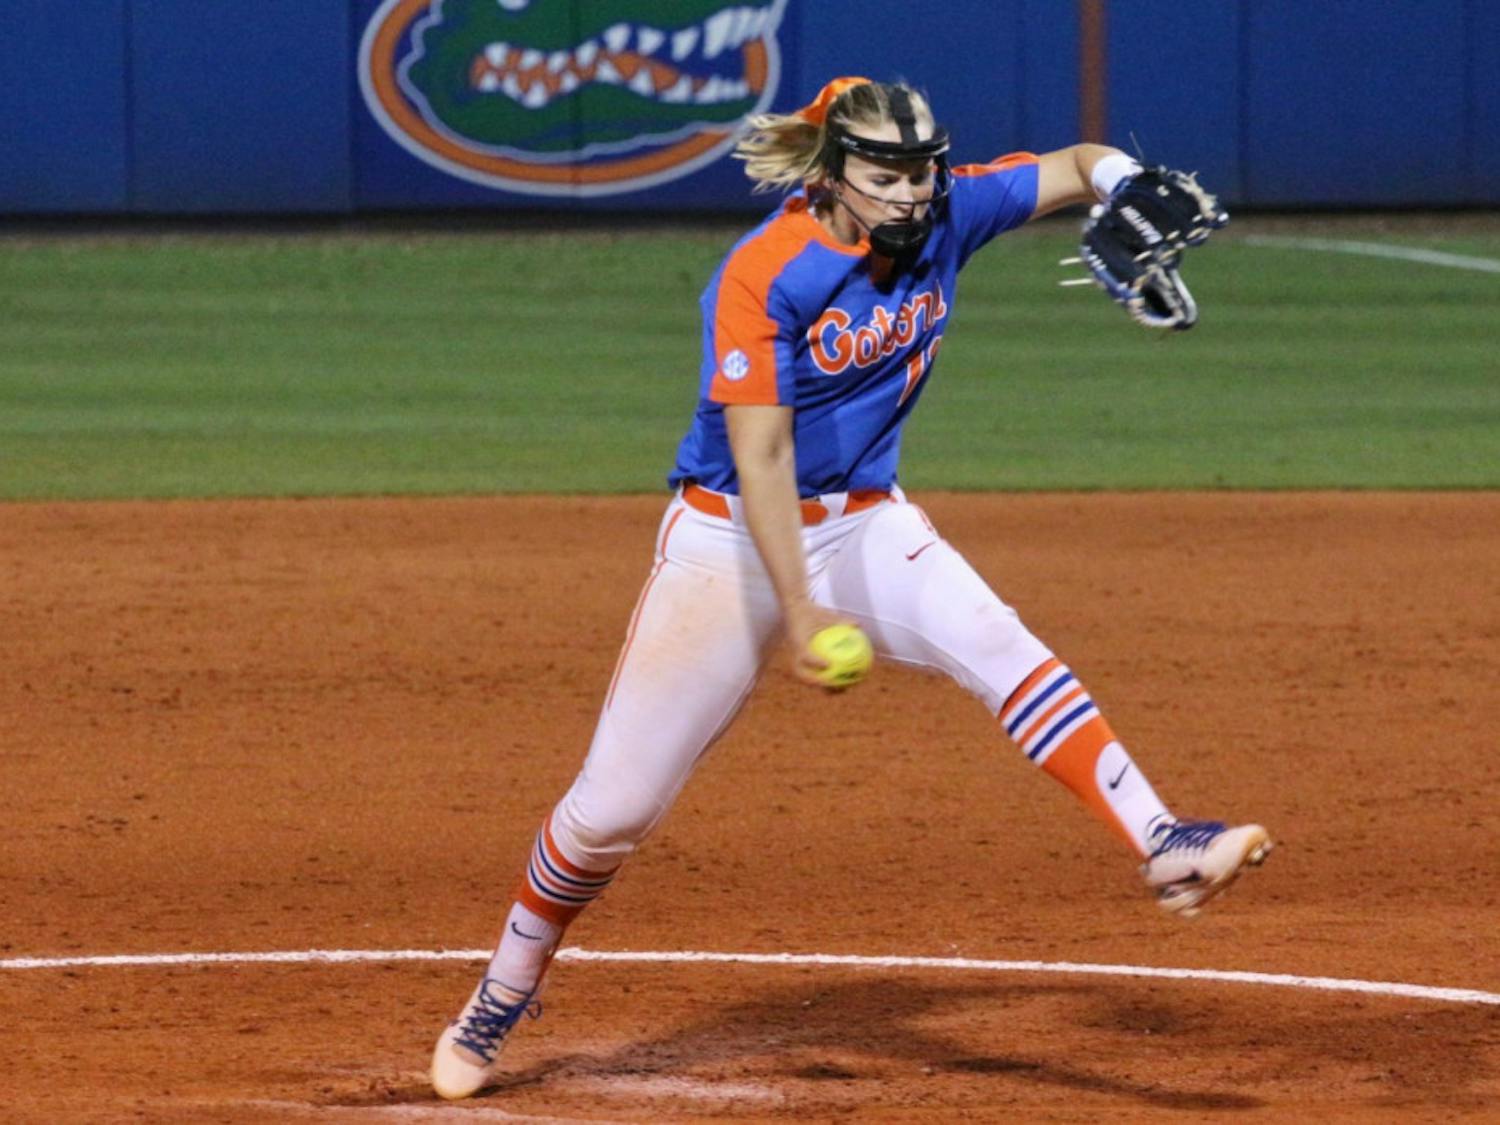 Senior Kelly Barnhill tallied a season-high 14 strikeouts Against Arizona State in the Gators' 7-2 win on Friday night.